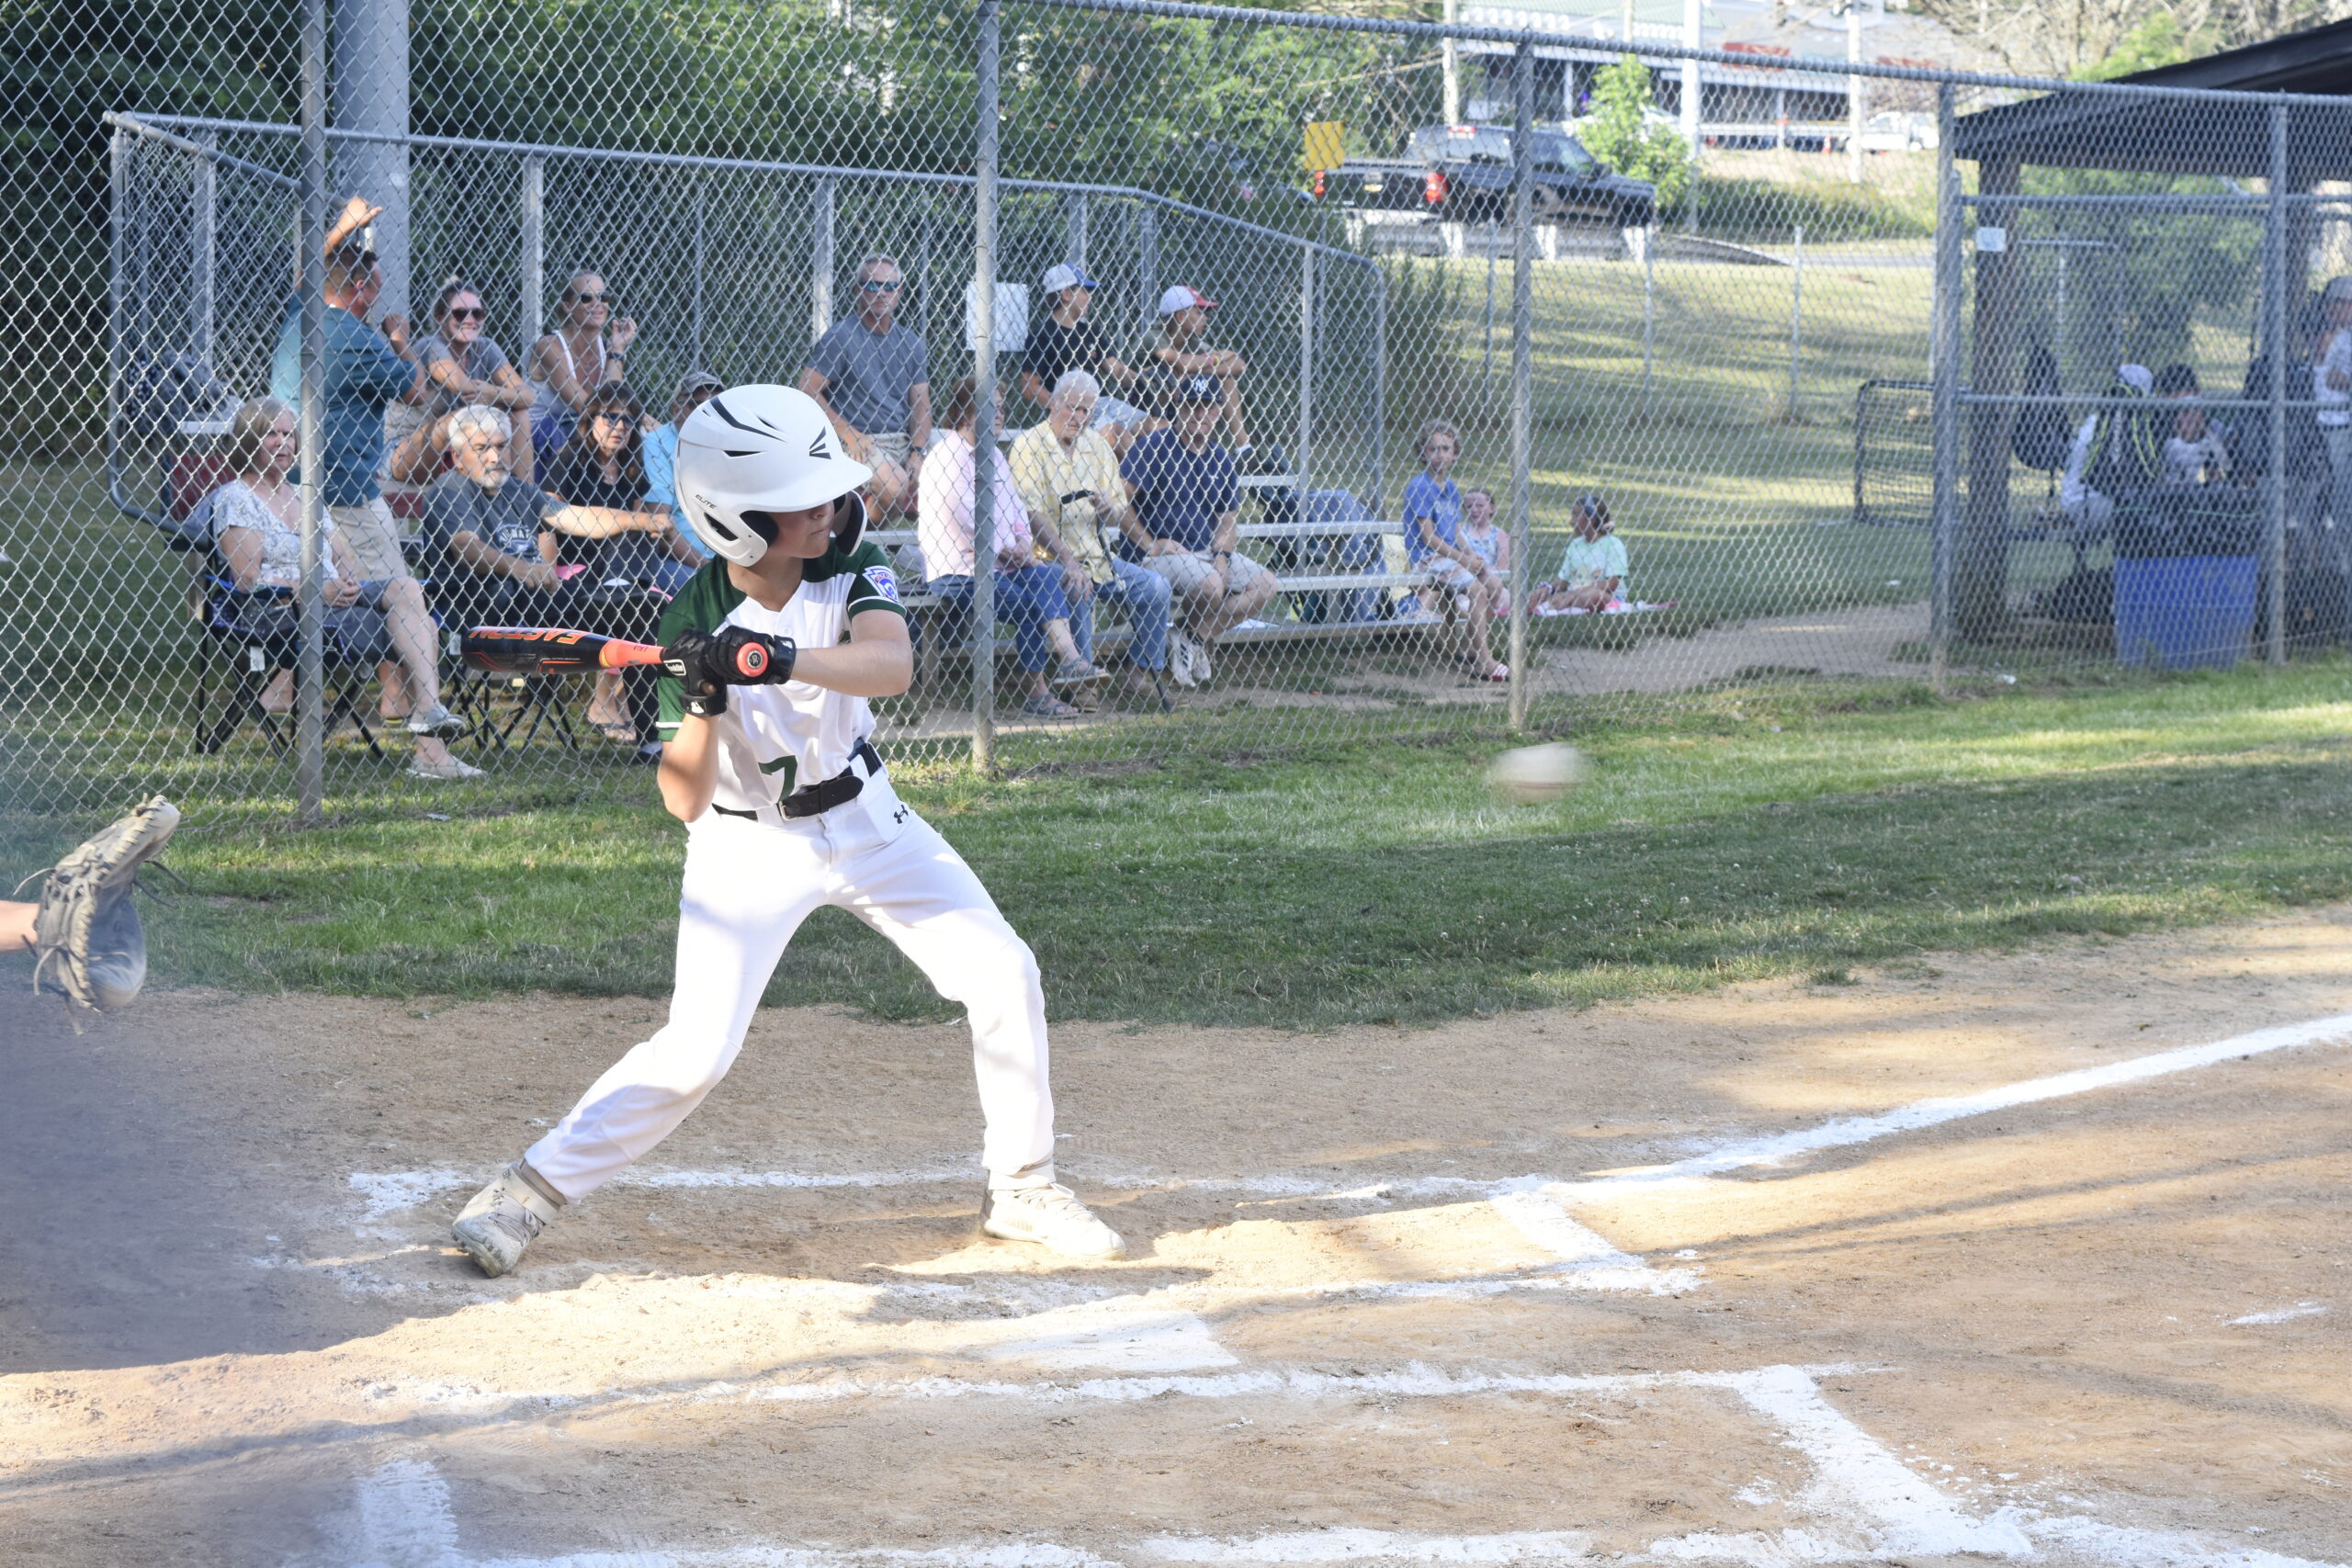 Cole Maag at the plate for East End.   DREW BUDD